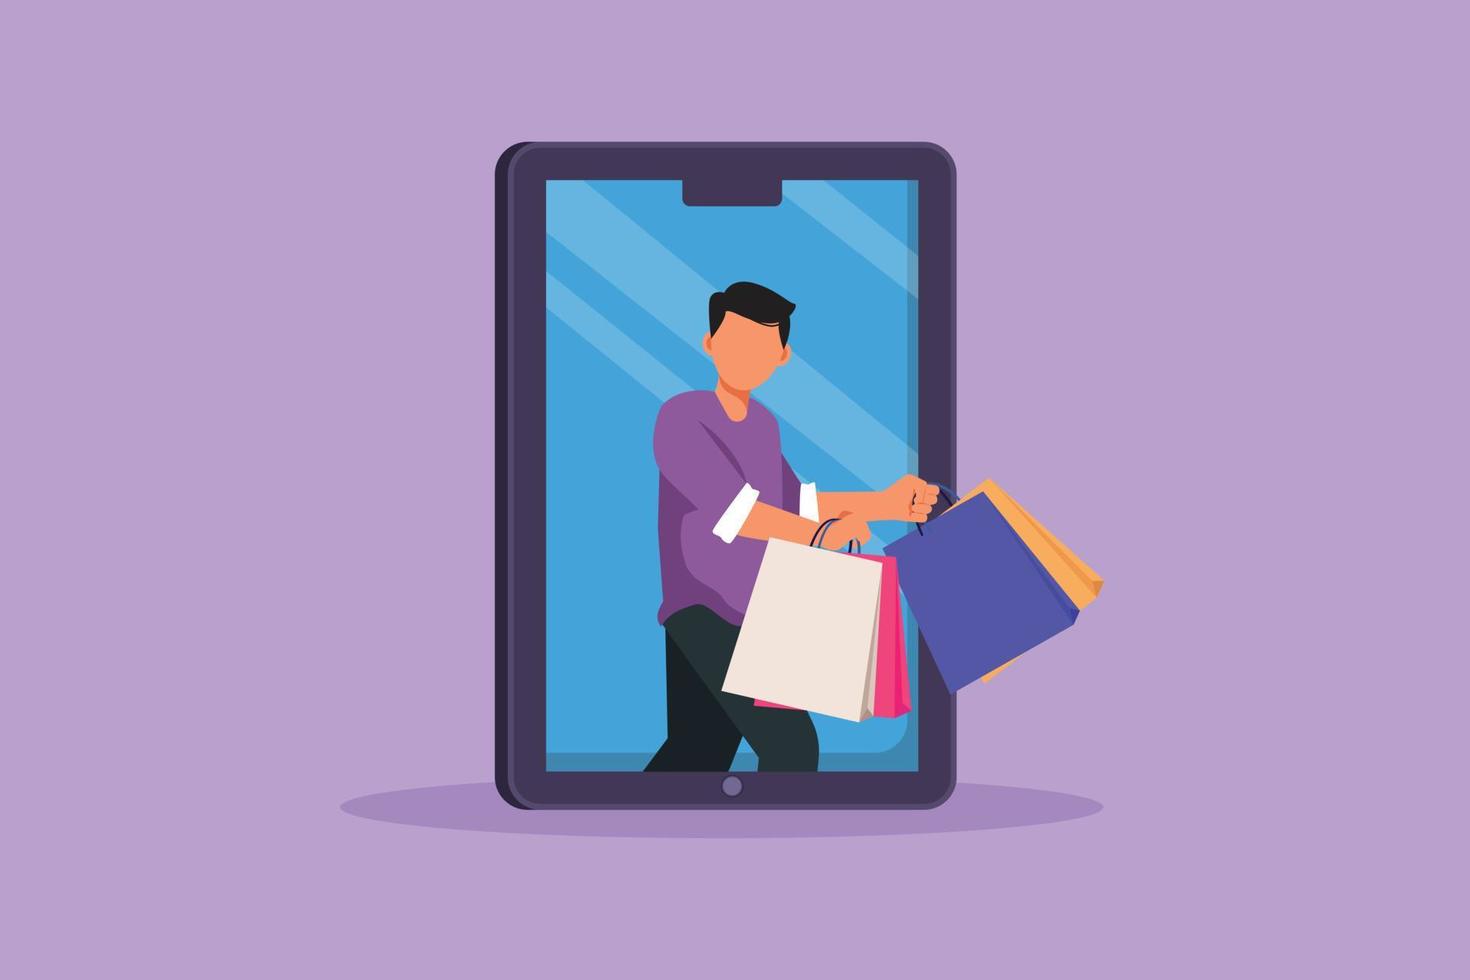 Cartoon flat style drawing young man coming out of large smartphone screen with holding shopping bags. Sale, digital lifestyle, consumerism. Online store technology. Graphic design vector illustration